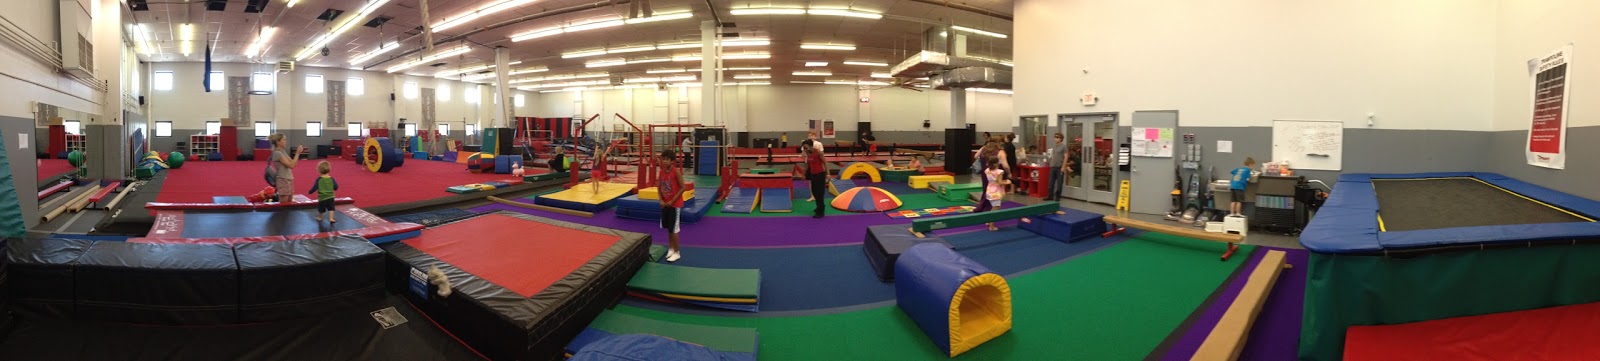 Dynamite Gymnastics, Rockville, MD - Family Fun in MD and Beyond